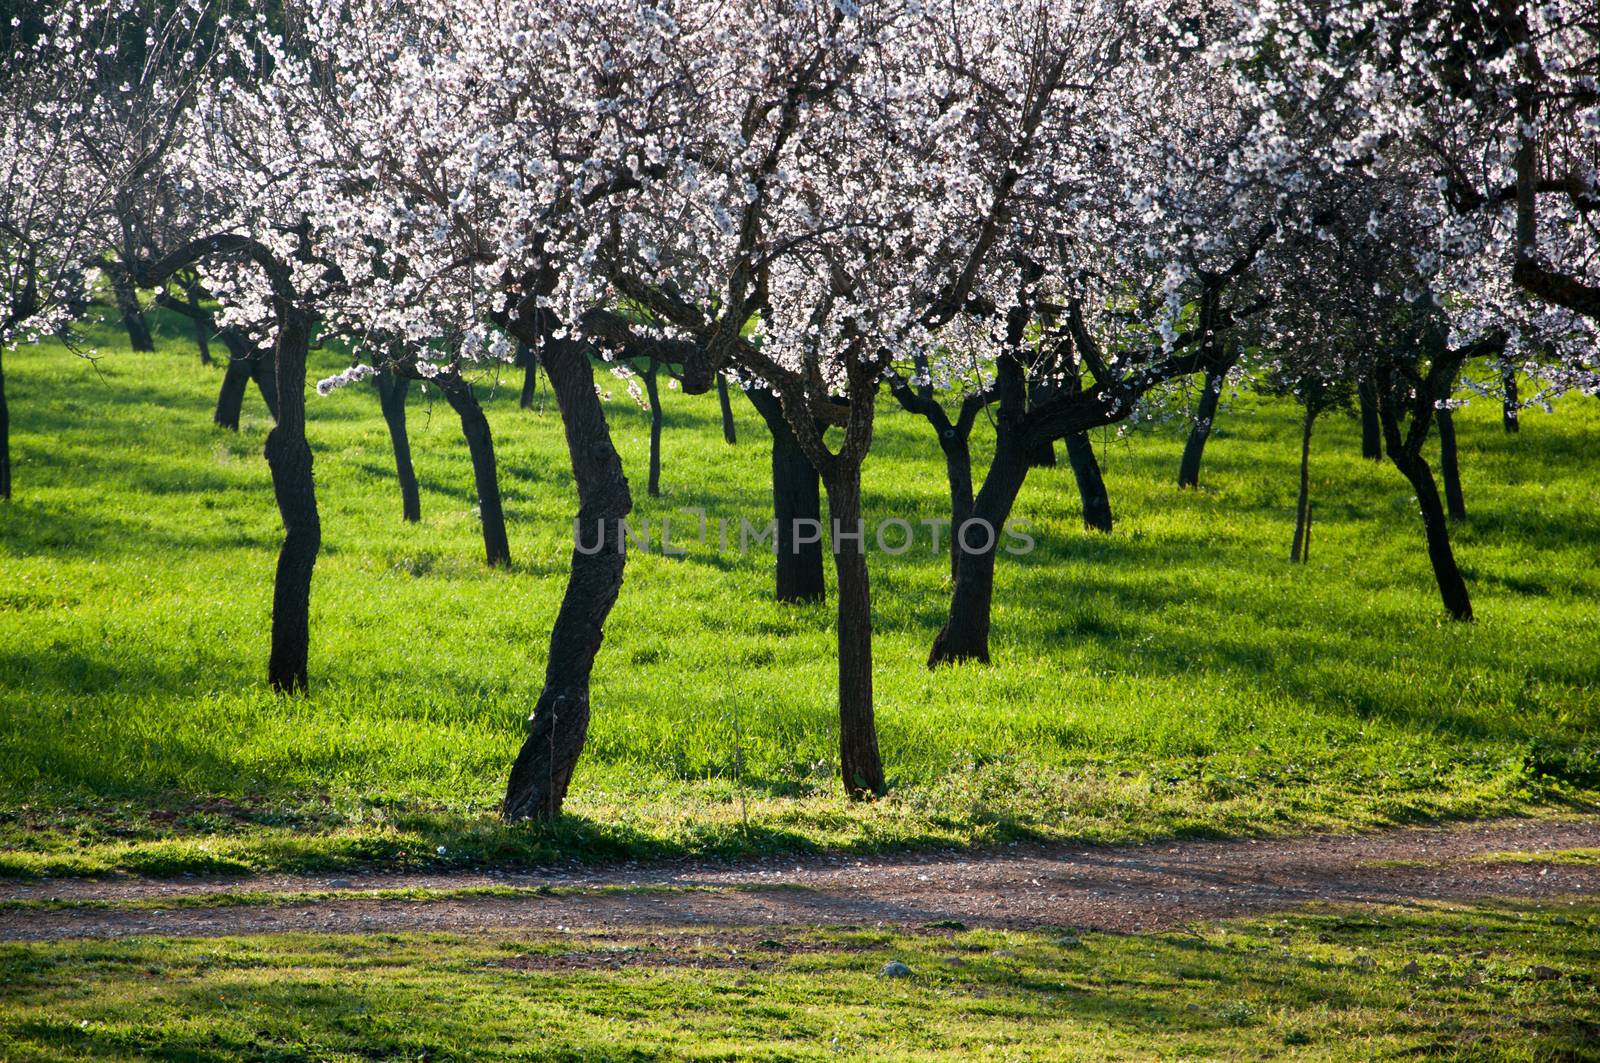 Almond trees with black trunks and green grass, Majorca, Balearic islands, Spain in February.